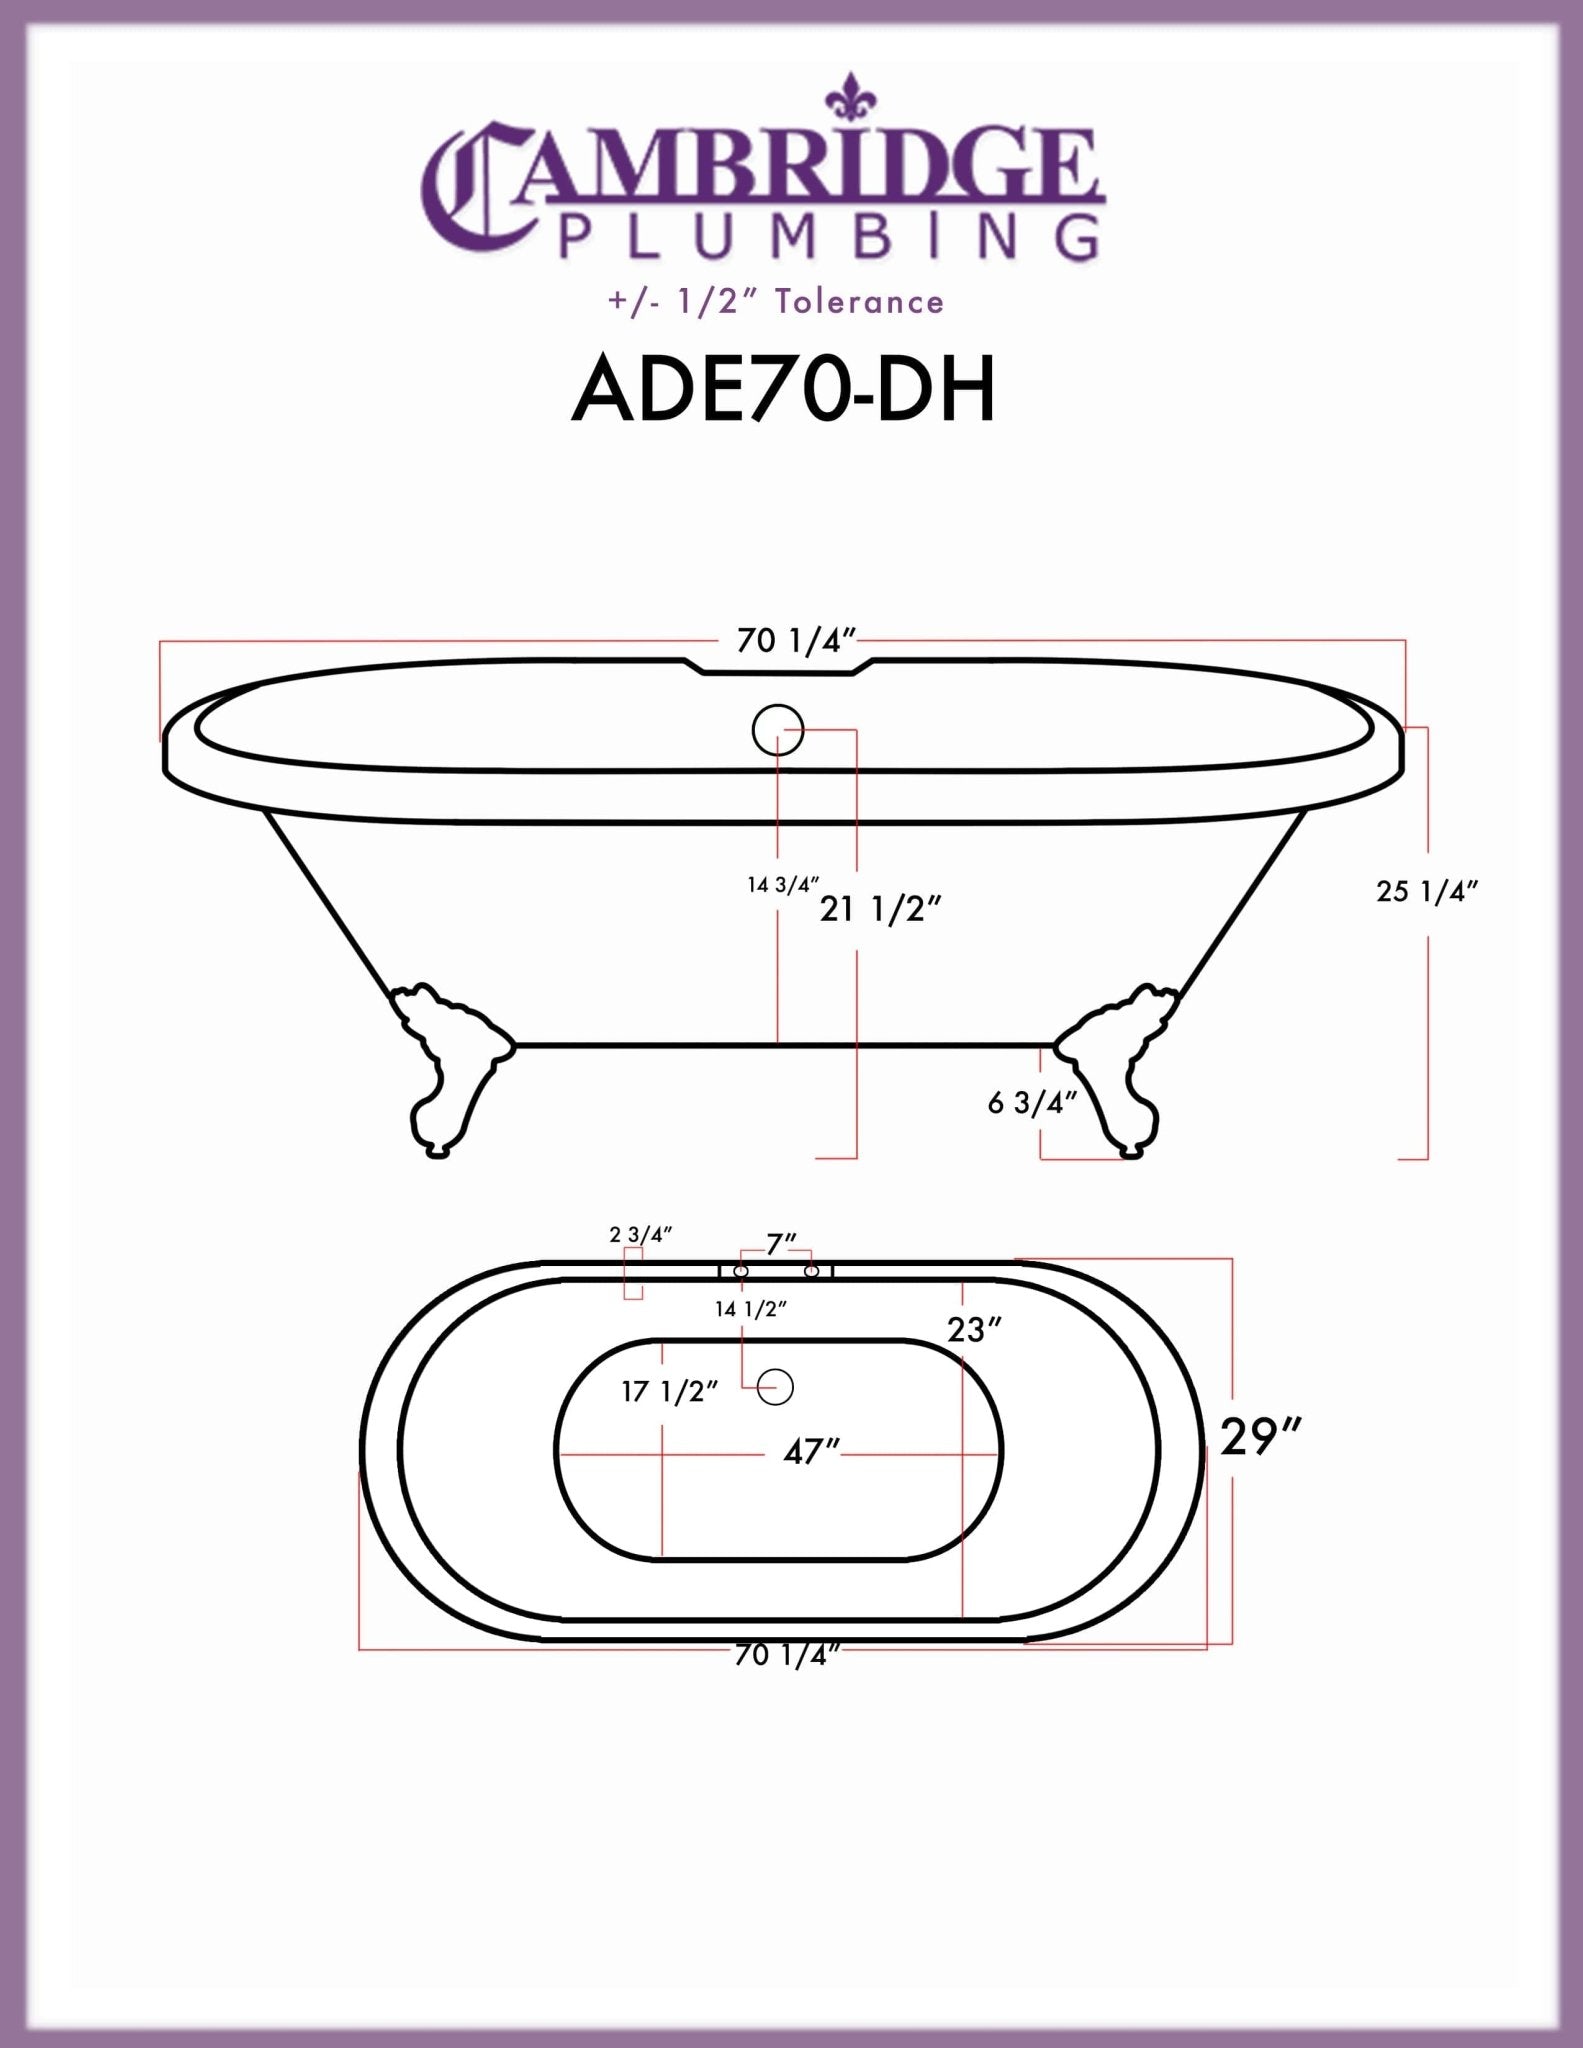 Acrylic Double Ended Clawfoot Soaking Tub and Complete Brushed Nickel Plumbing Package - Molaix633131608533ADE-684D-PKG-BN-7DH